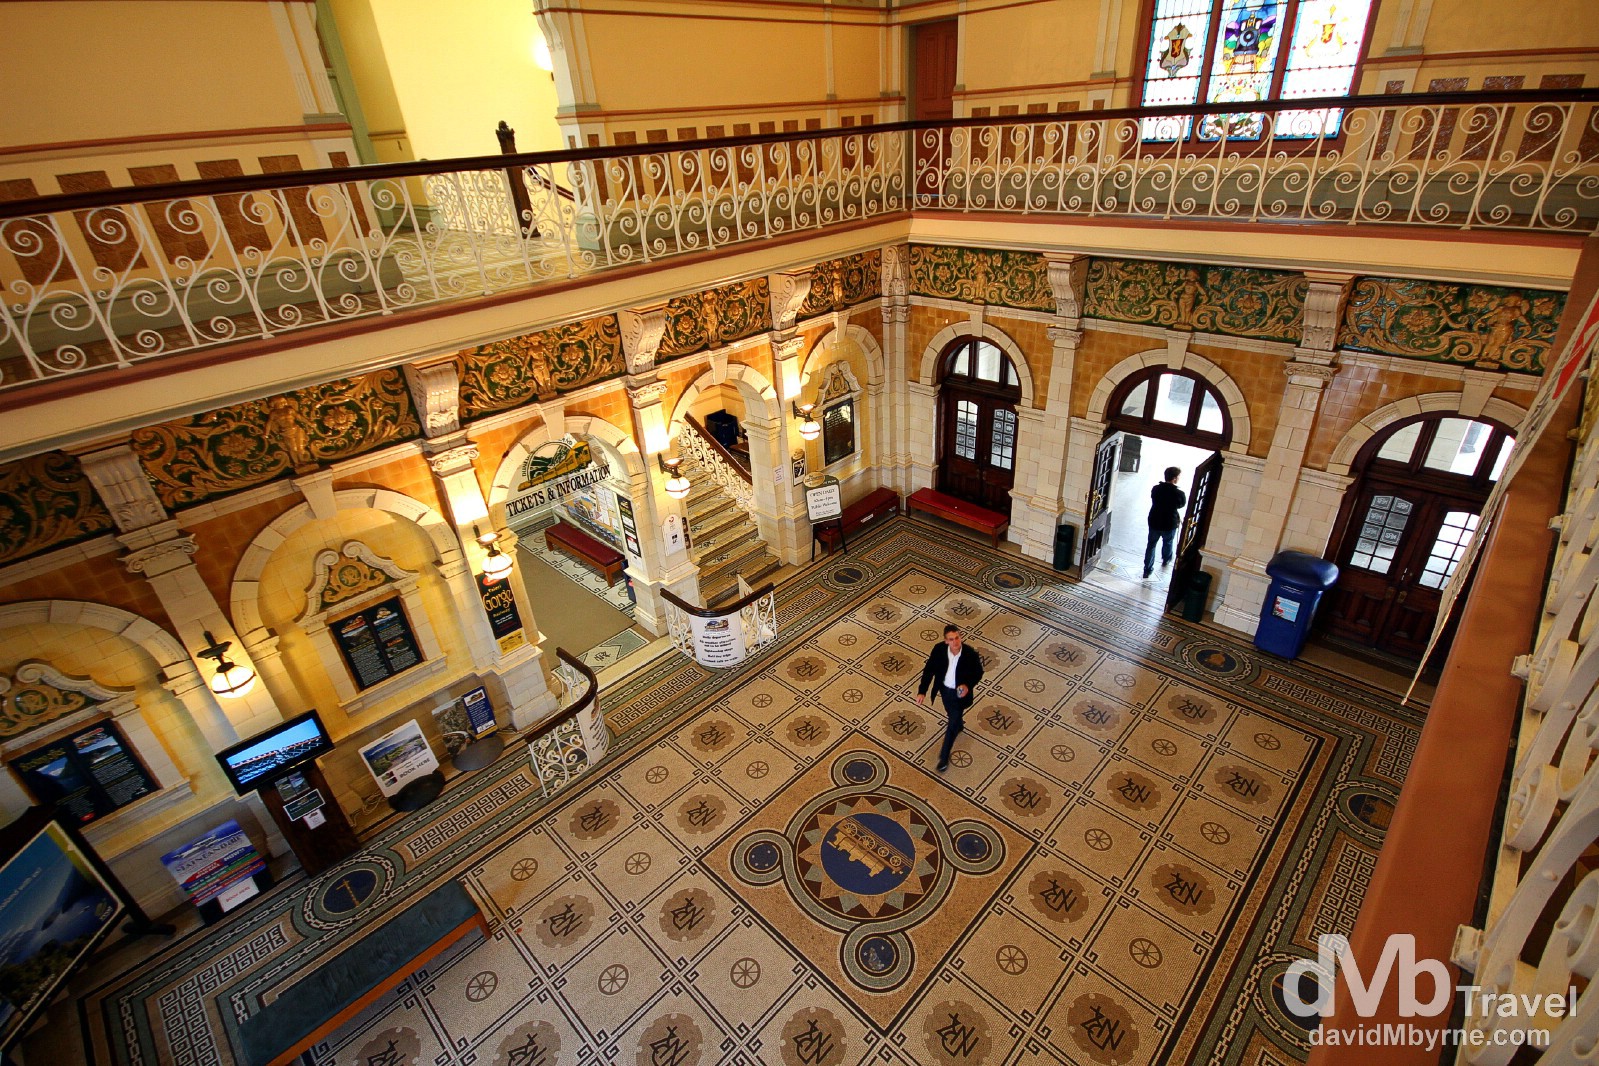 The foyer of the Edwardian railway station in Dunedin, South Island, New Zealand. May 29th 2012.